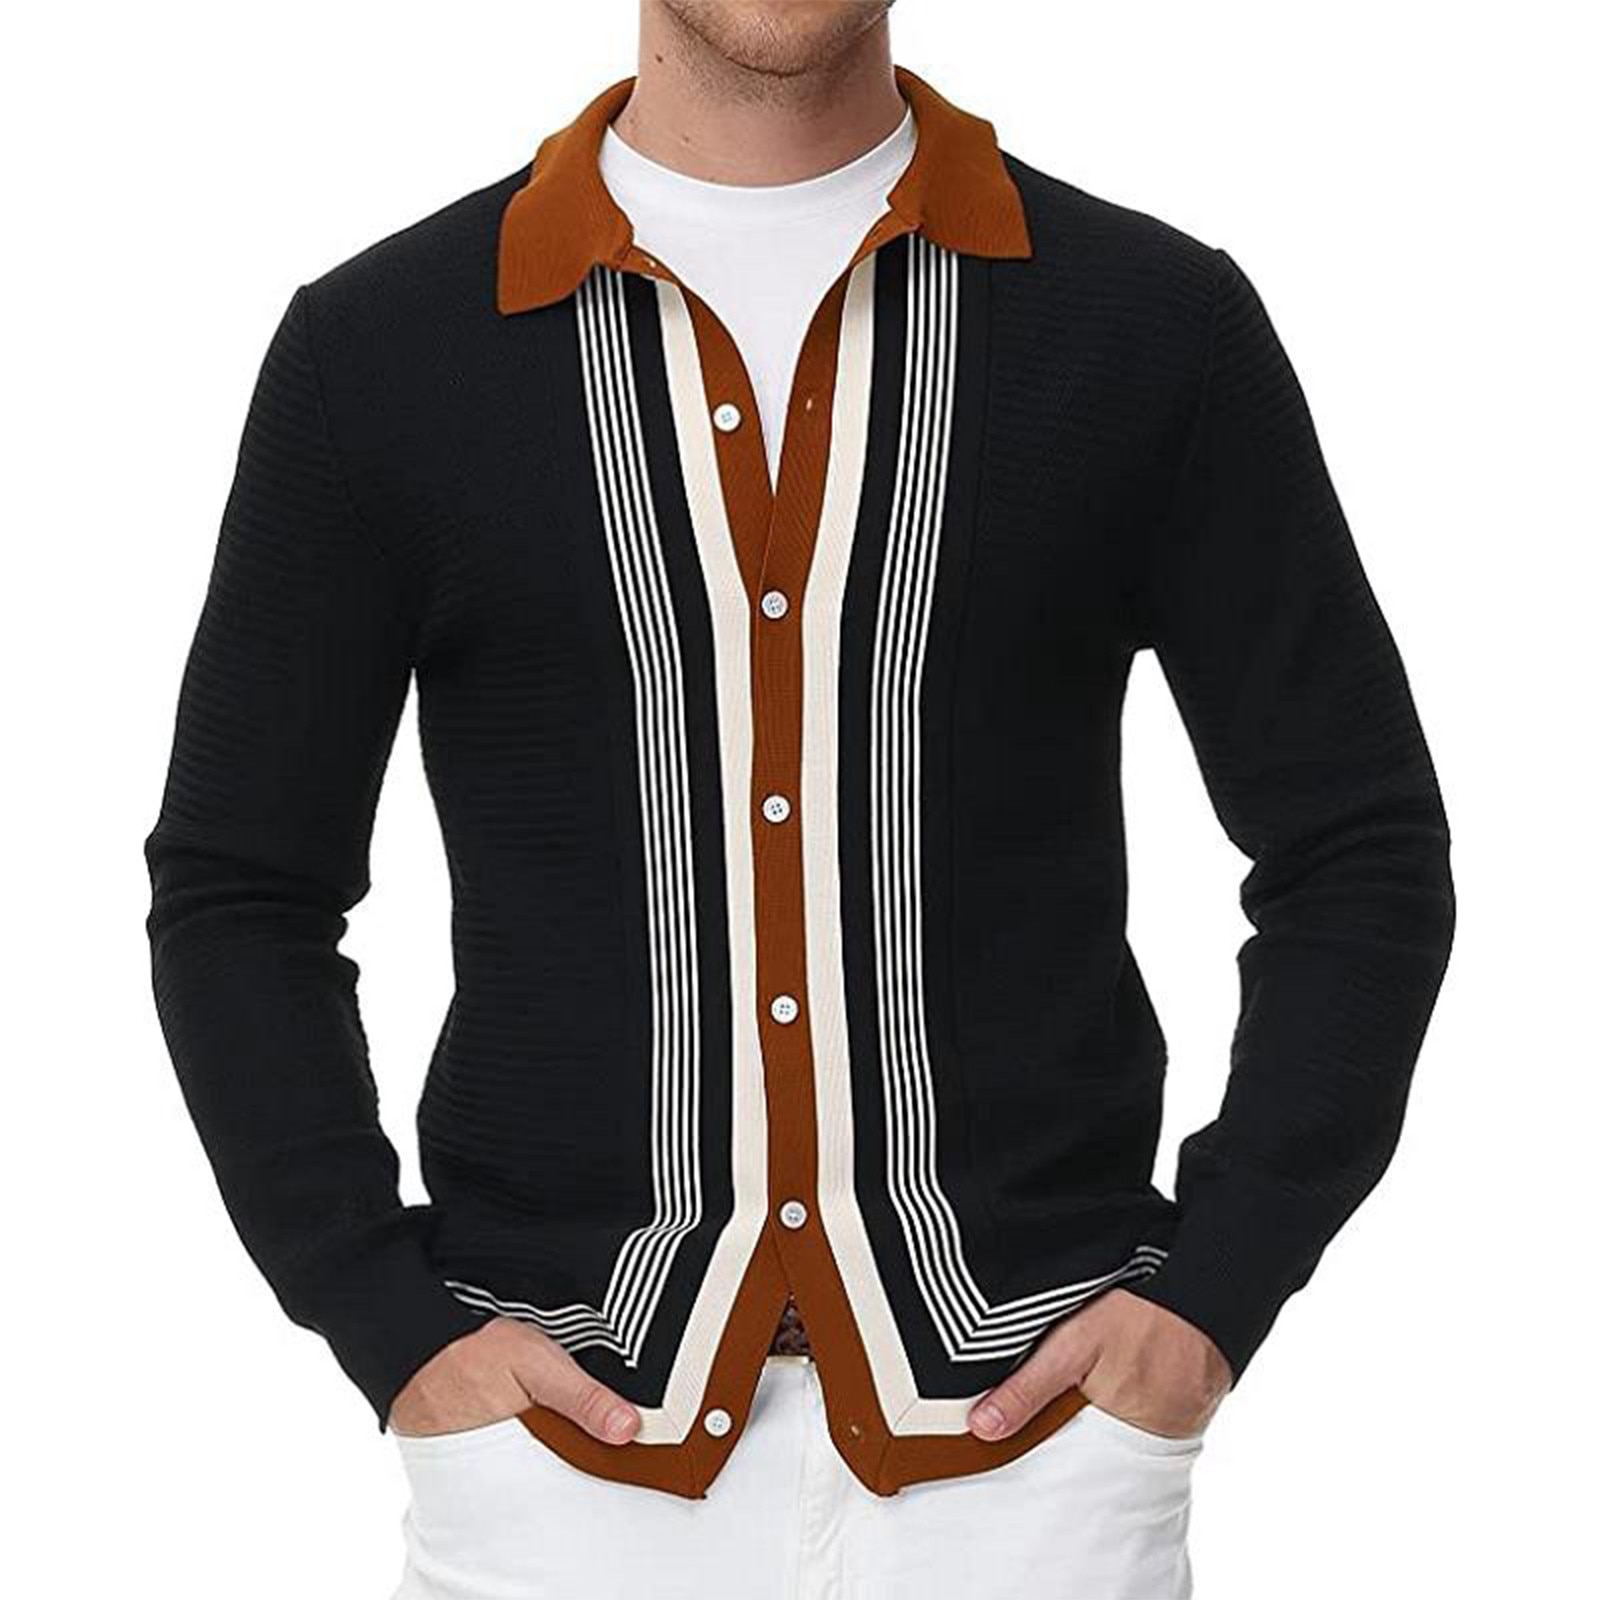 Spring And Autumn Men&s Fashion Long Sleeve Striped Printed Knitted V-Neck Single-breasted Business Cardigan Sweater Topsg3